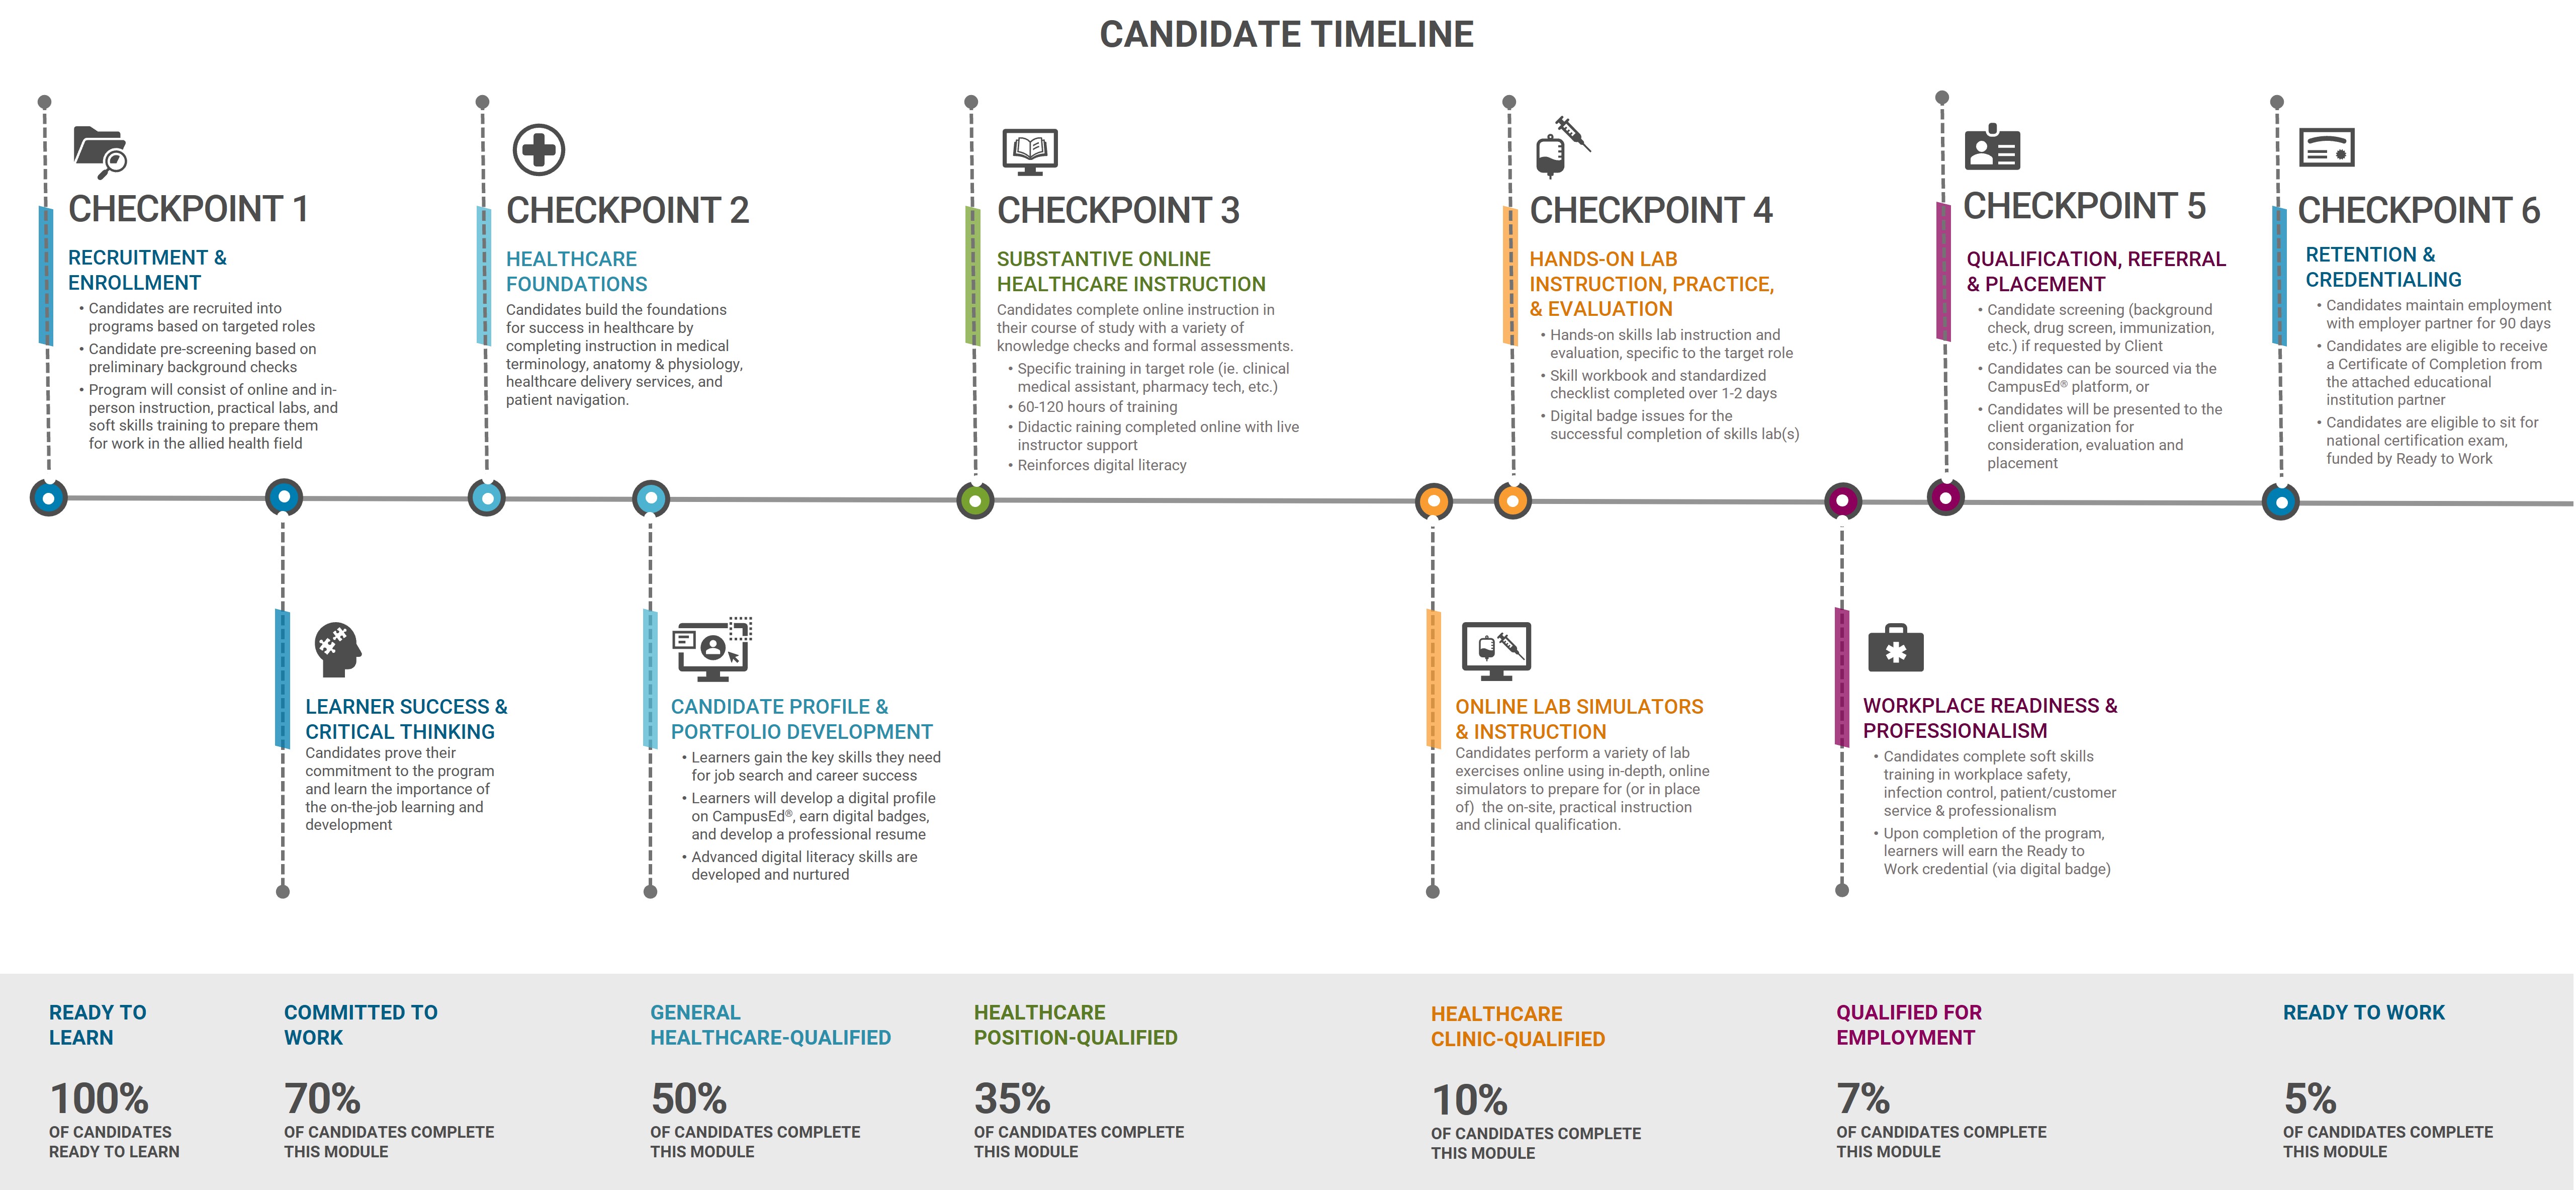 Ready to Work Candidate Timeline